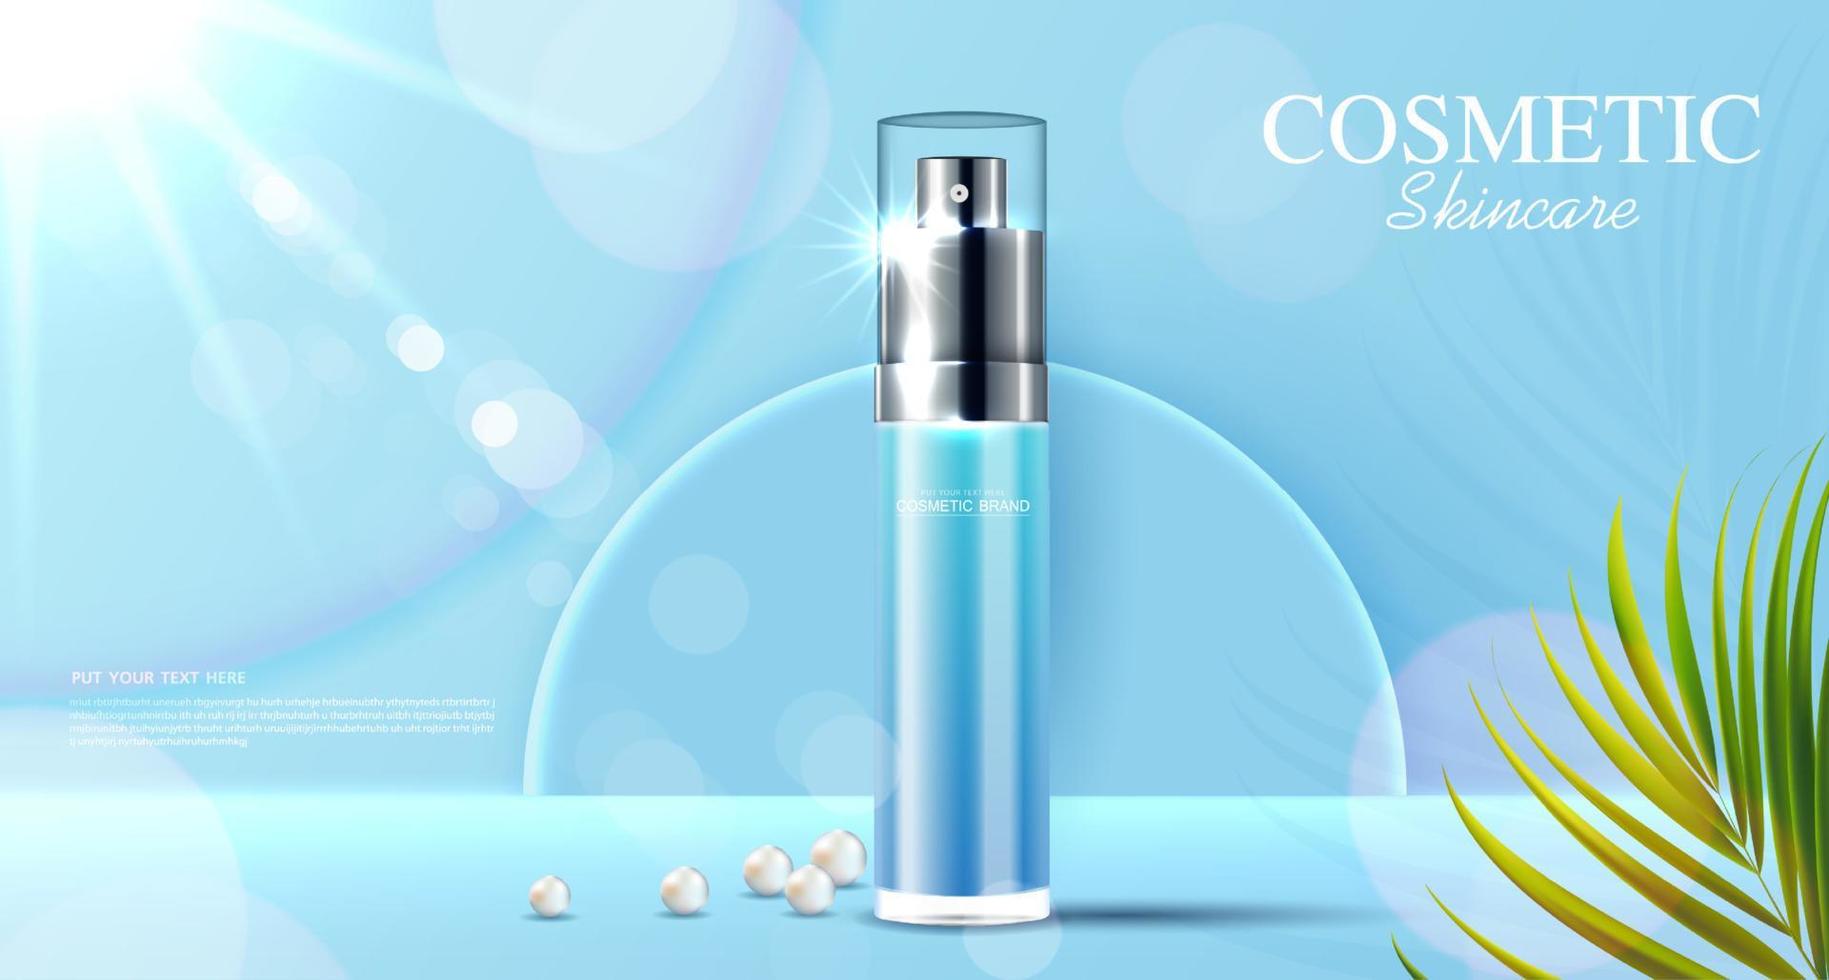 Cosmetics or skin care product ads with bottle and pearl, blue background with tropical leaves. vector illustration design